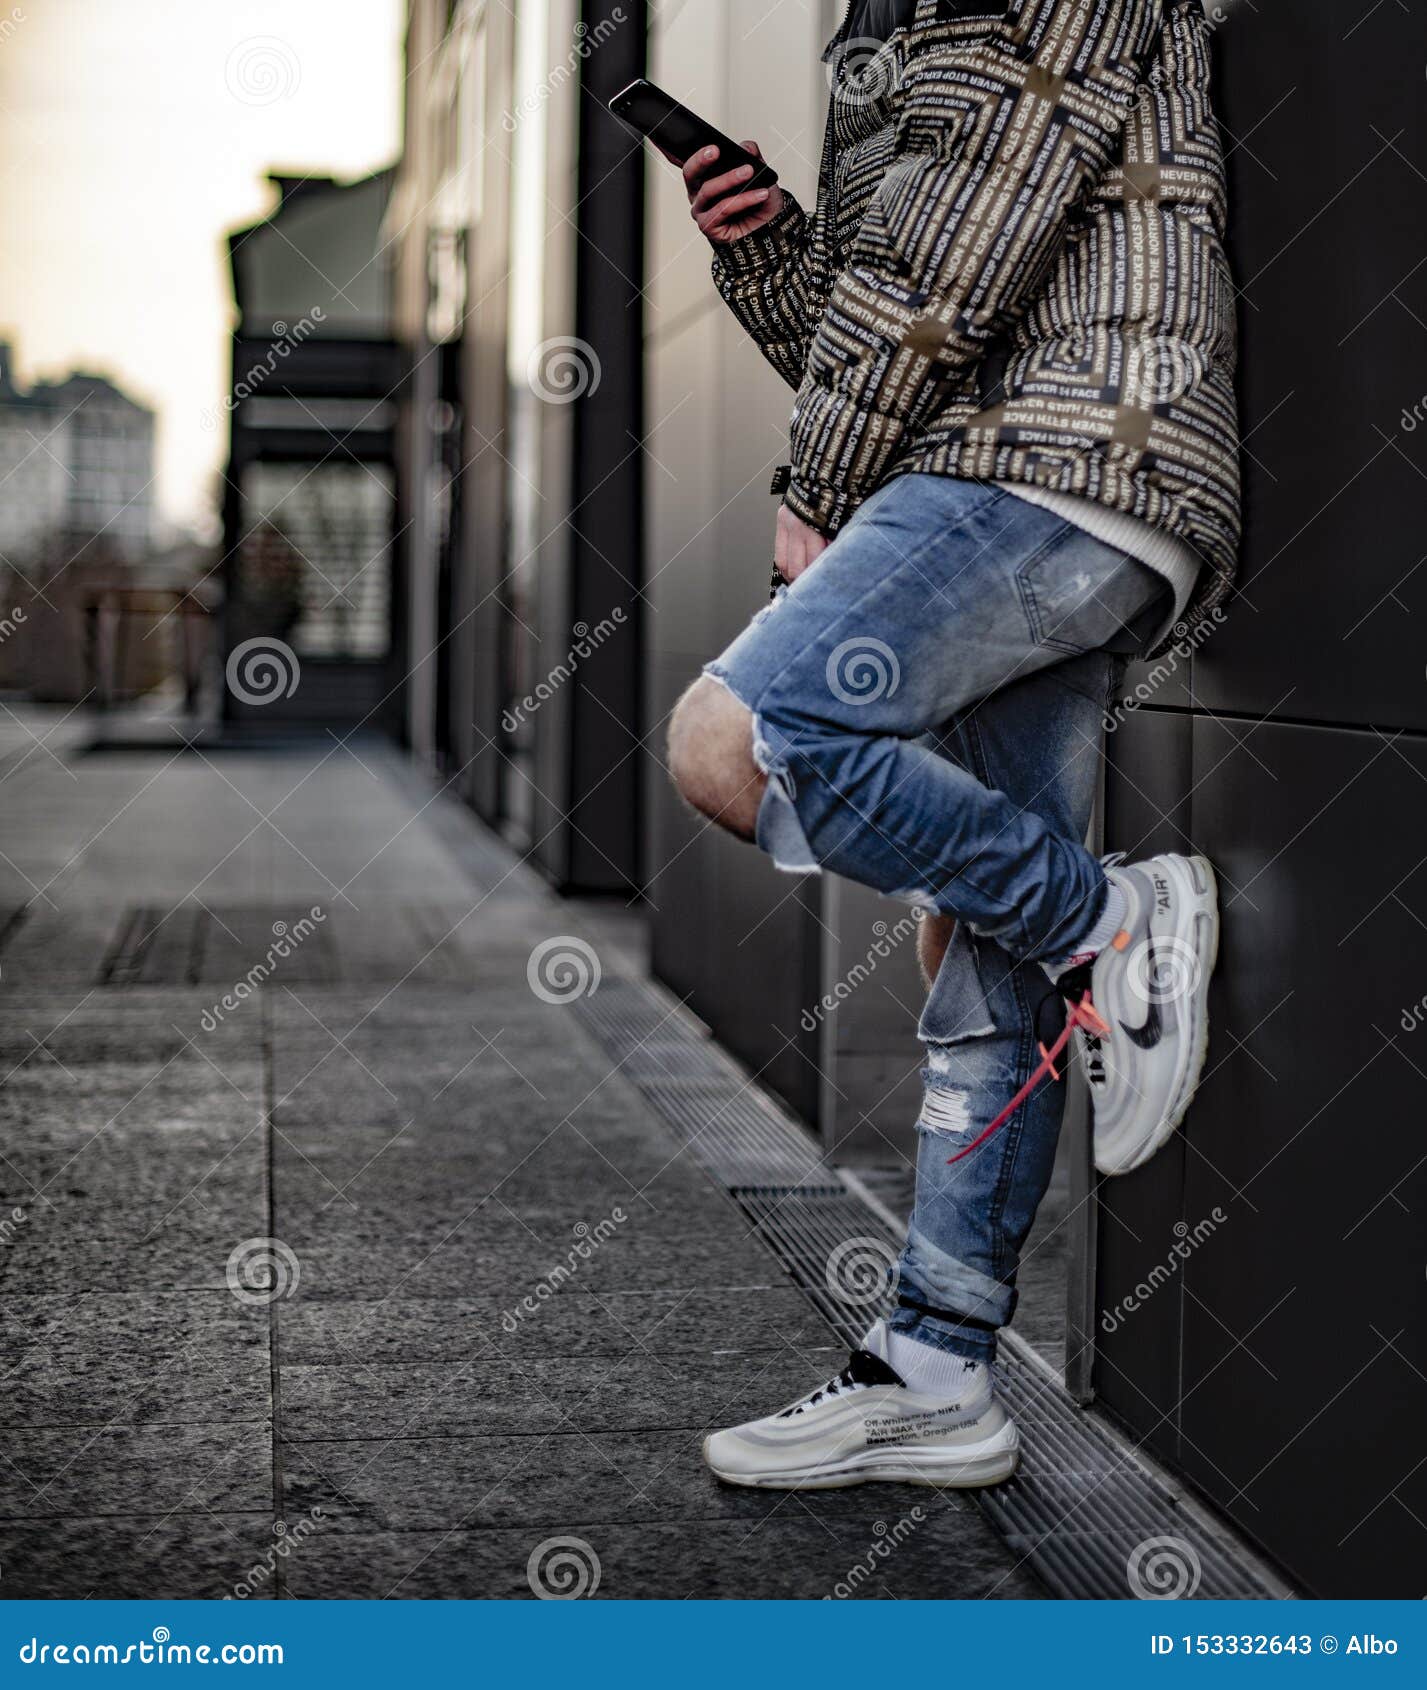 off white air max 97 outfit